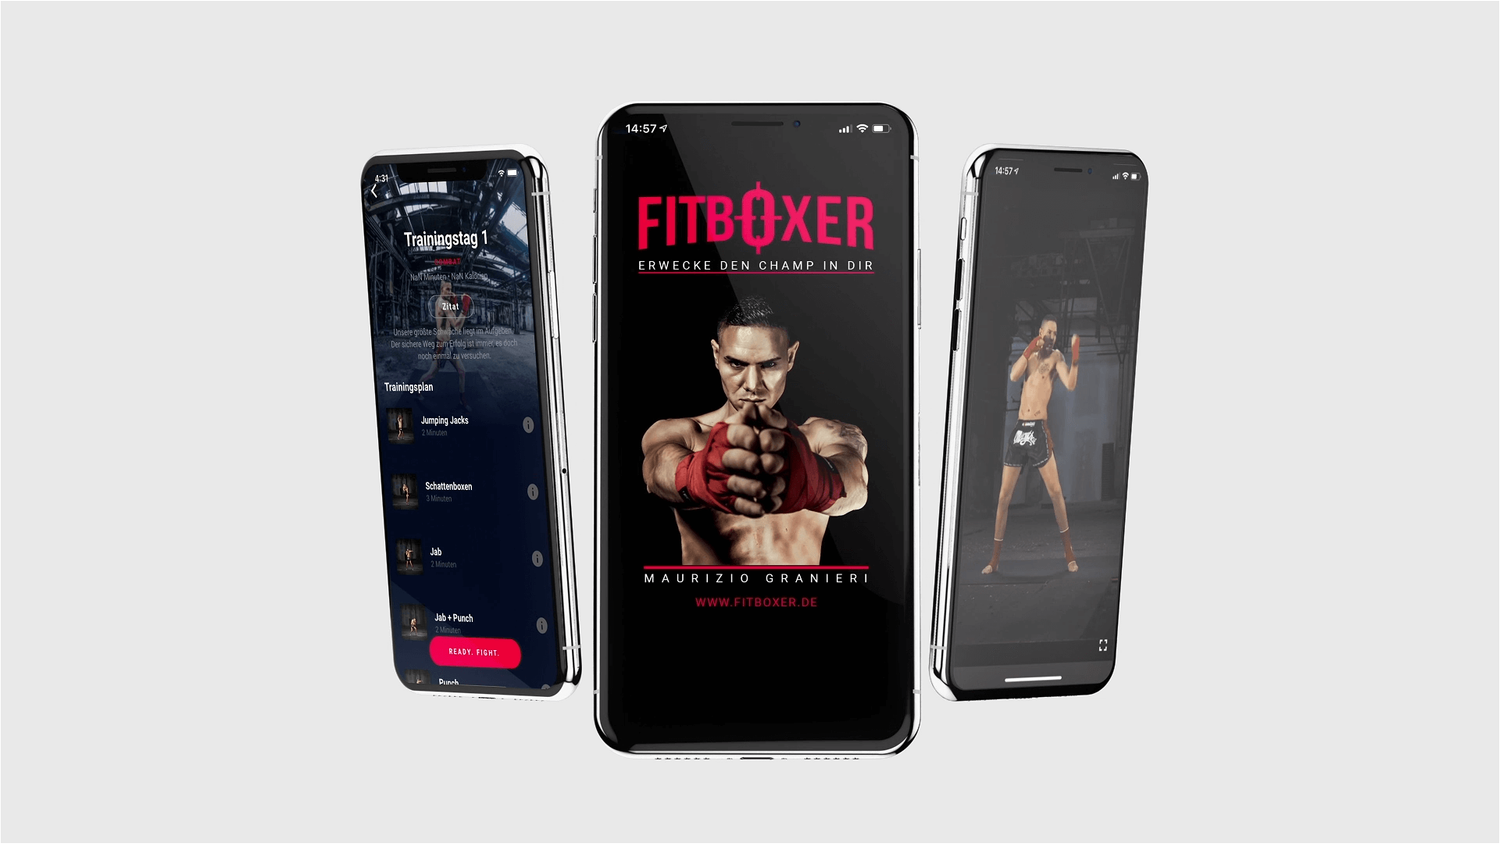 FitBoxer